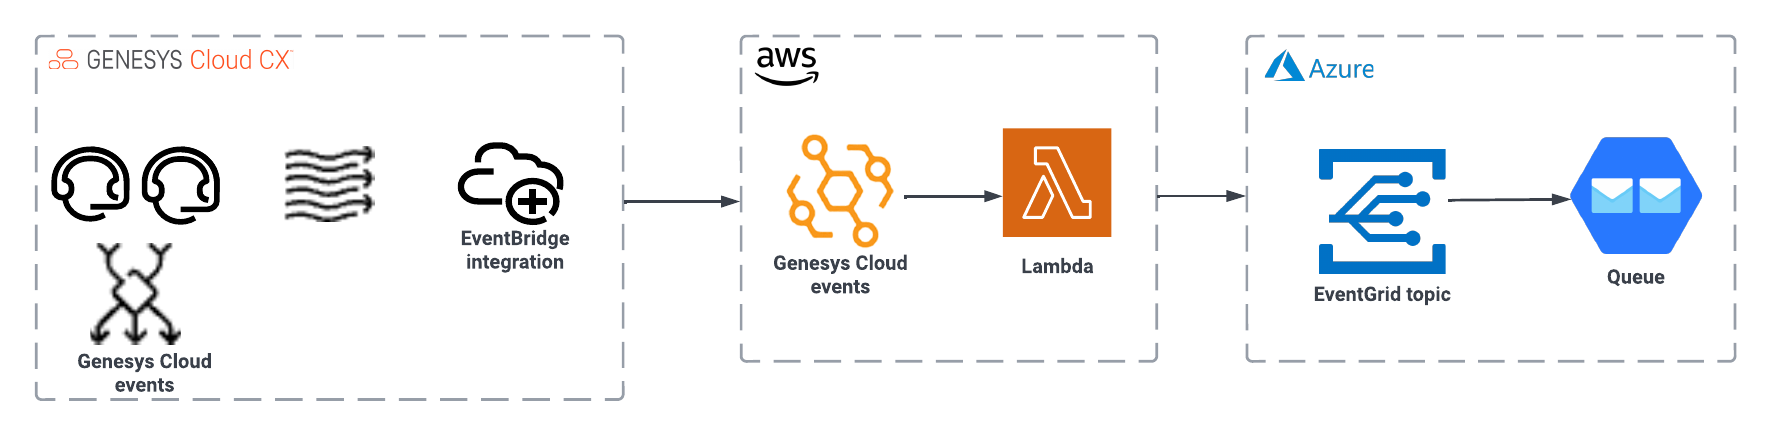 Send Genesys Cloud events from AWS EventBridge to Azure EventGrid